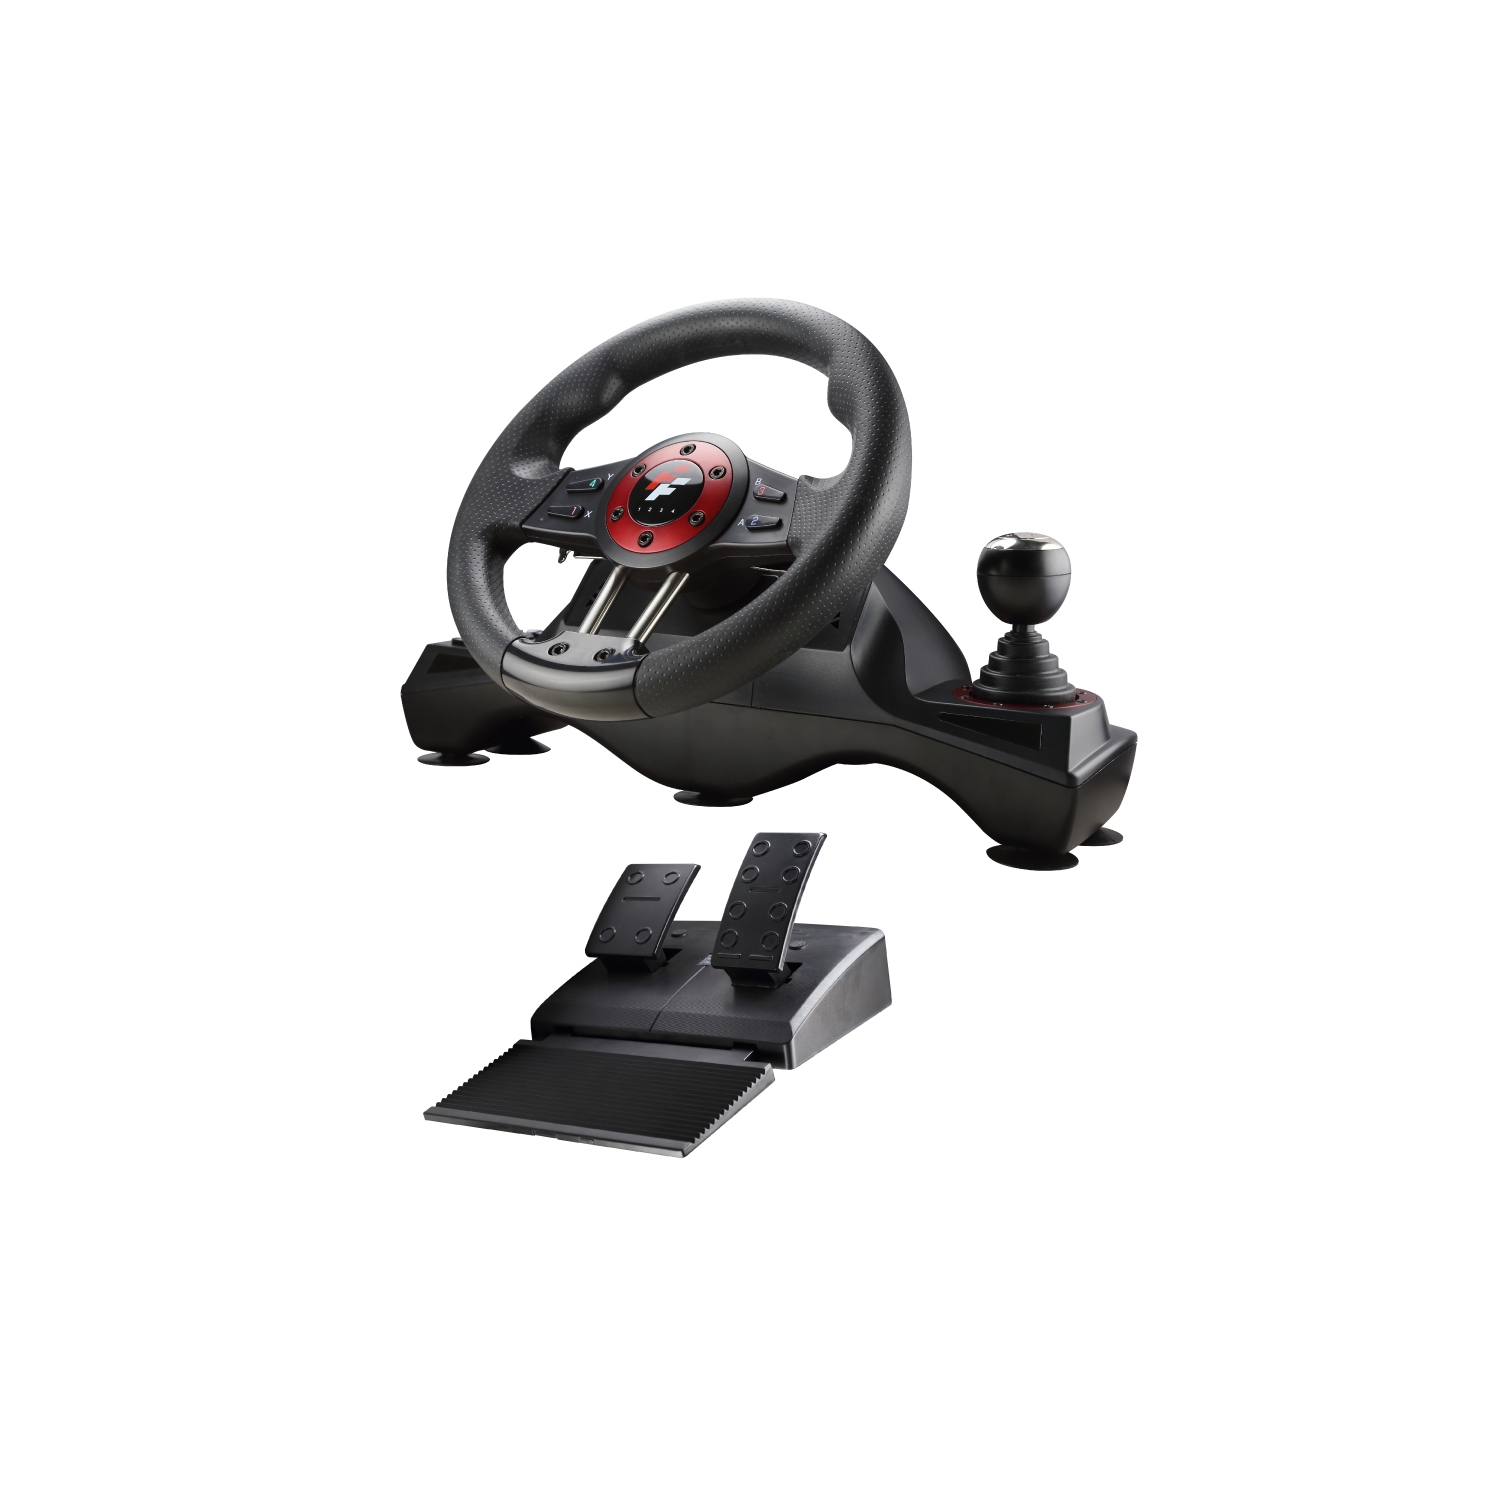 Flashfire WH-2304V 4-in-1 Force Racing Wheel Set - Compatible with Windows PC, PS4 & Xbox One